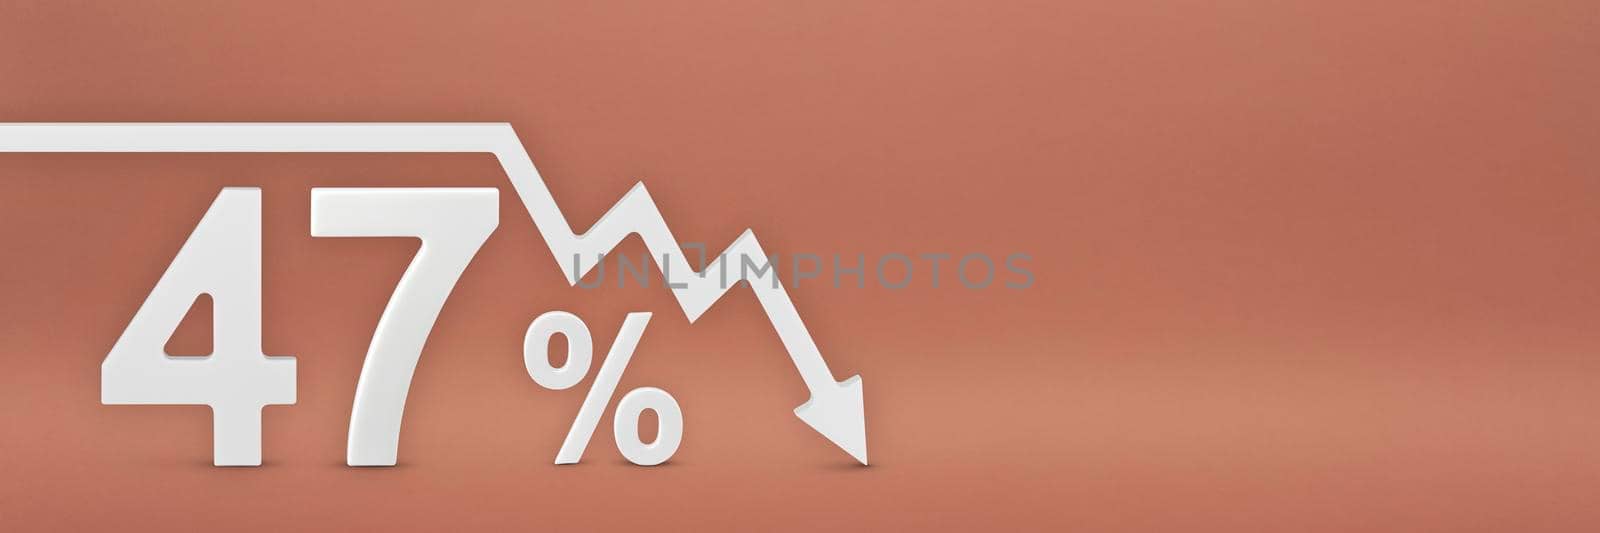 forty-seven percent, the arrow on the graph is pointing down. Stock market crash, bear market, inflation.Economic collapse, collapse of stocks.3d banner,47 percent discount sign on a red background. by SERSOL